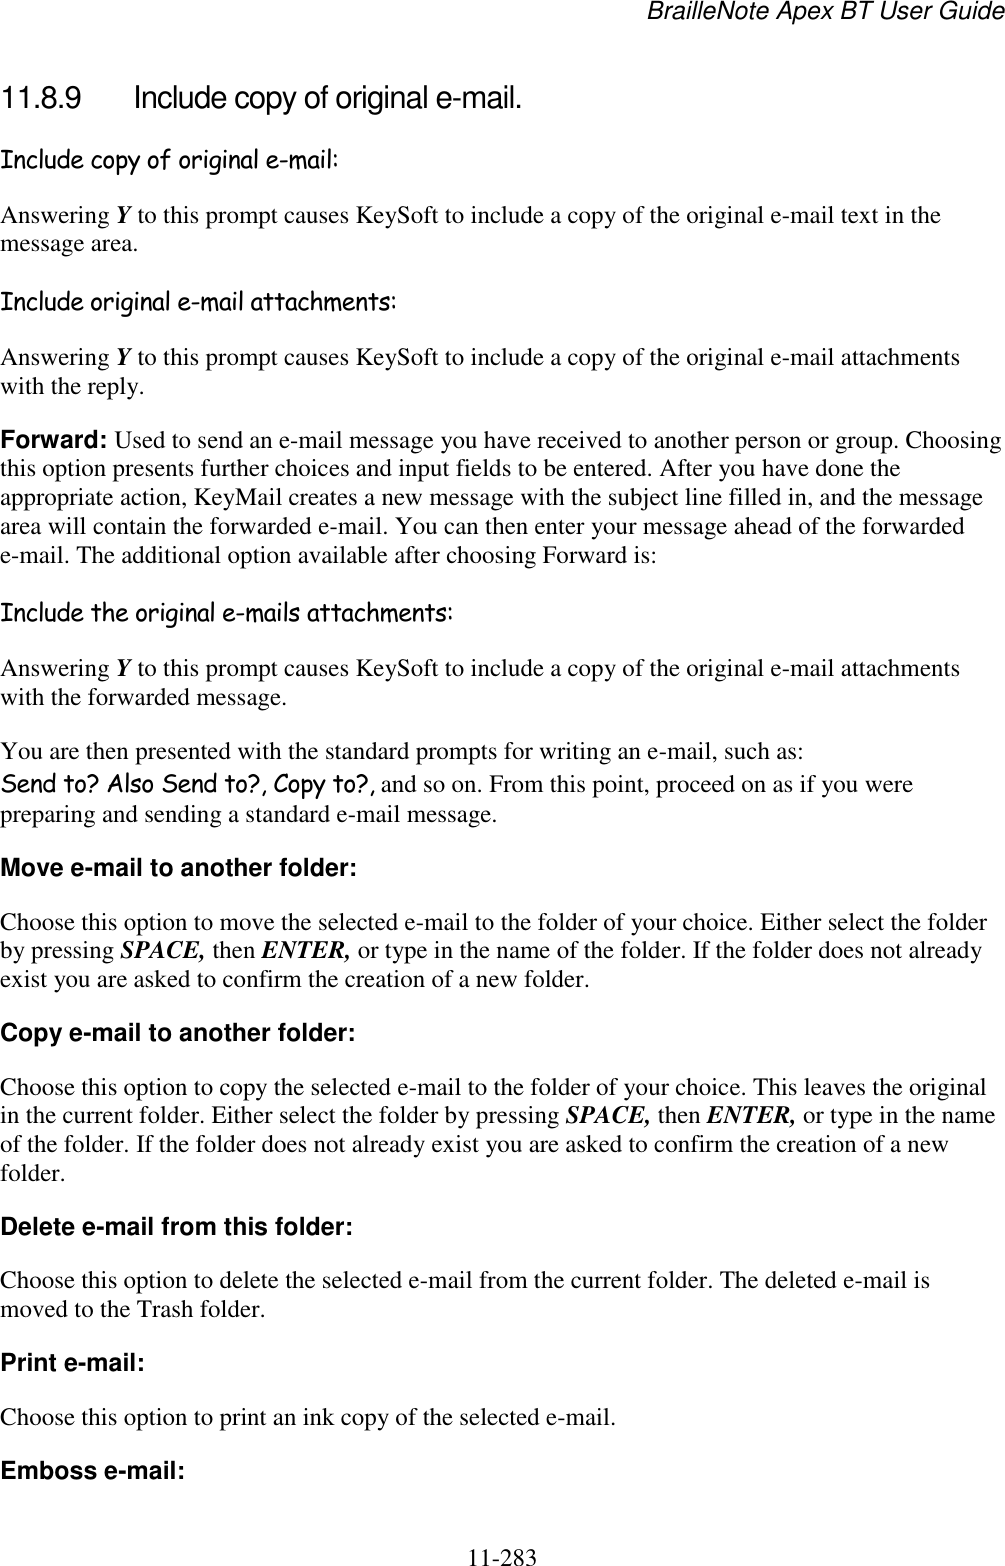 BrailleNote Apex BT User Guide   11-283   11.8.9  Include copy of original e-mail. Include copy of original e-mail: Answering Y to this prompt causes KeySoft to include a copy of the original e-mail text in the message area. Include original e-mail attachments: Answering Y to this prompt causes KeySoft to include a copy of the original e-mail attachments with the reply. Forward: Used to send an e-mail message you have received to another person or group. Choosing this option presents further choices and input fields to be entered. After you have done the appropriate action, KeyMail creates a new message with the subject line filled in, and the message area will contain the forwarded e-mail. You can then enter your message ahead of the forwarded e-mail. The additional option available after choosing Forward is: Include the original e-mails attachments: Answering Y to this prompt causes KeySoft to include a copy of the original e-mail attachments with the forwarded message. You are then presented with the standard prompts for writing an e-mail, such as: Send to? Also Send to?, Copy to?, and so on. From this point, proceed on as if you were preparing and sending a standard e-mail message. Move e-mail to another folder: Choose this option to move the selected e-mail to the folder of your choice. Either select the folder by pressing SPACE, then ENTER, or type in the name of the folder. If the folder does not already exist you are asked to confirm the creation of a new folder. Copy e-mail to another folder: Choose this option to copy the selected e-mail to the folder of your choice. This leaves the original in the current folder. Either select the folder by pressing SPACE, then ENTER, or type in the name of the folder. If the folder does not already exist you are asked to confirm the creation of a new folder. Delete e-mail from this folder: Choose this option to delete the selected e-mail from the current folder. The deleted e-mail is moved to the Trash folder. Print e-mail: Choose this option to print an ink copy of the selected e-mail. Emboss e-mail: 